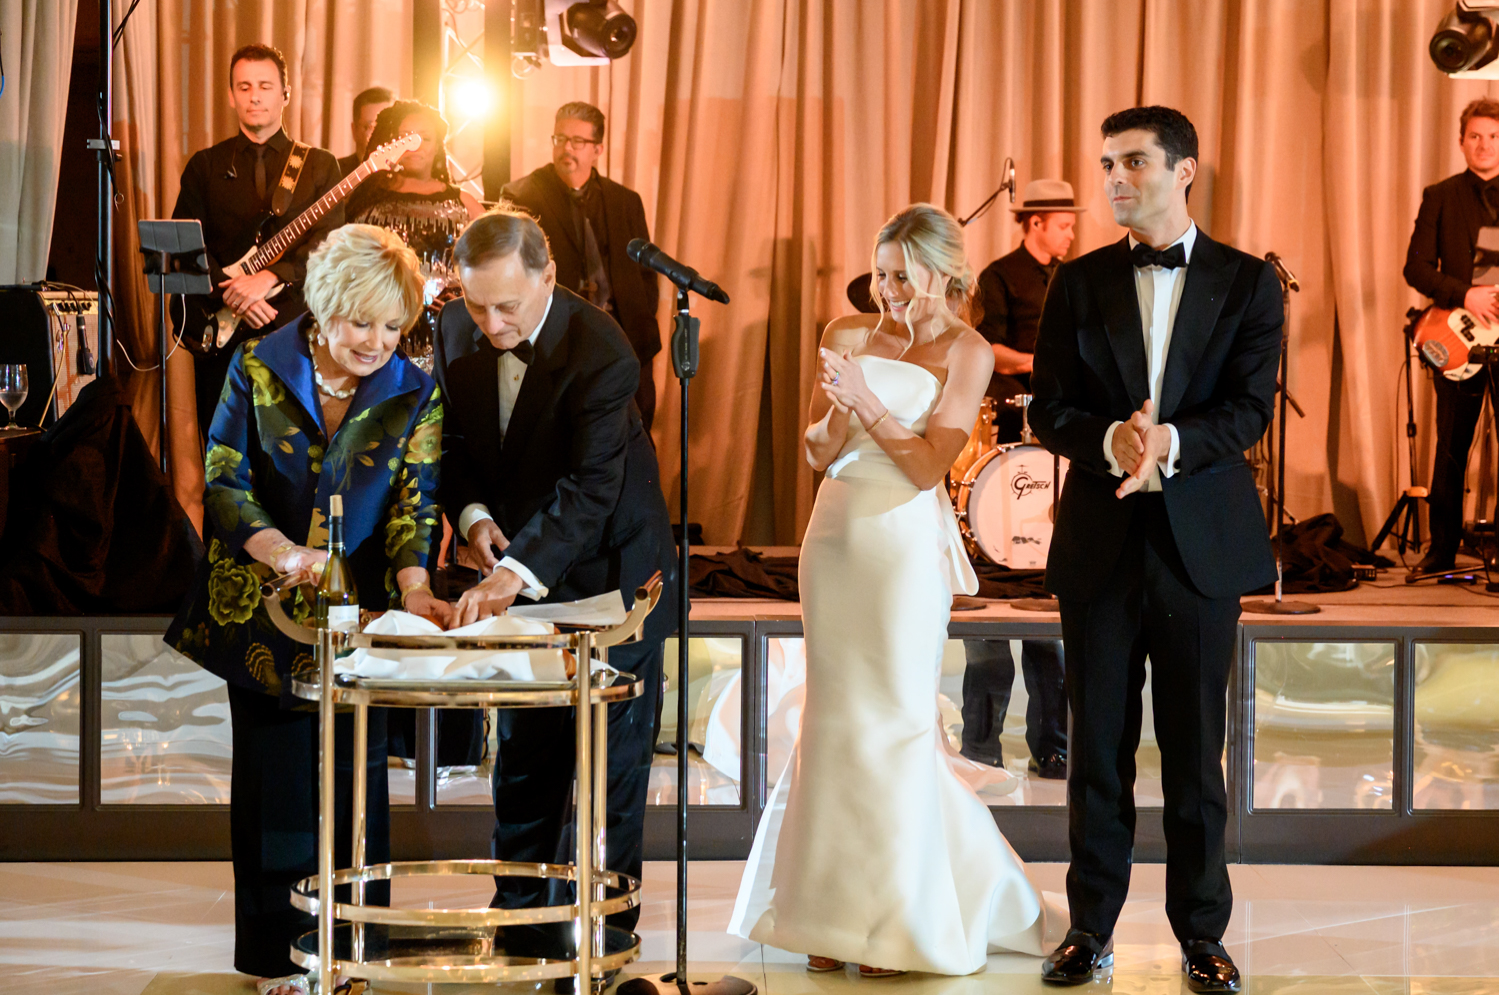 The bride and groom clap as family members present a Jewish wedding tradition